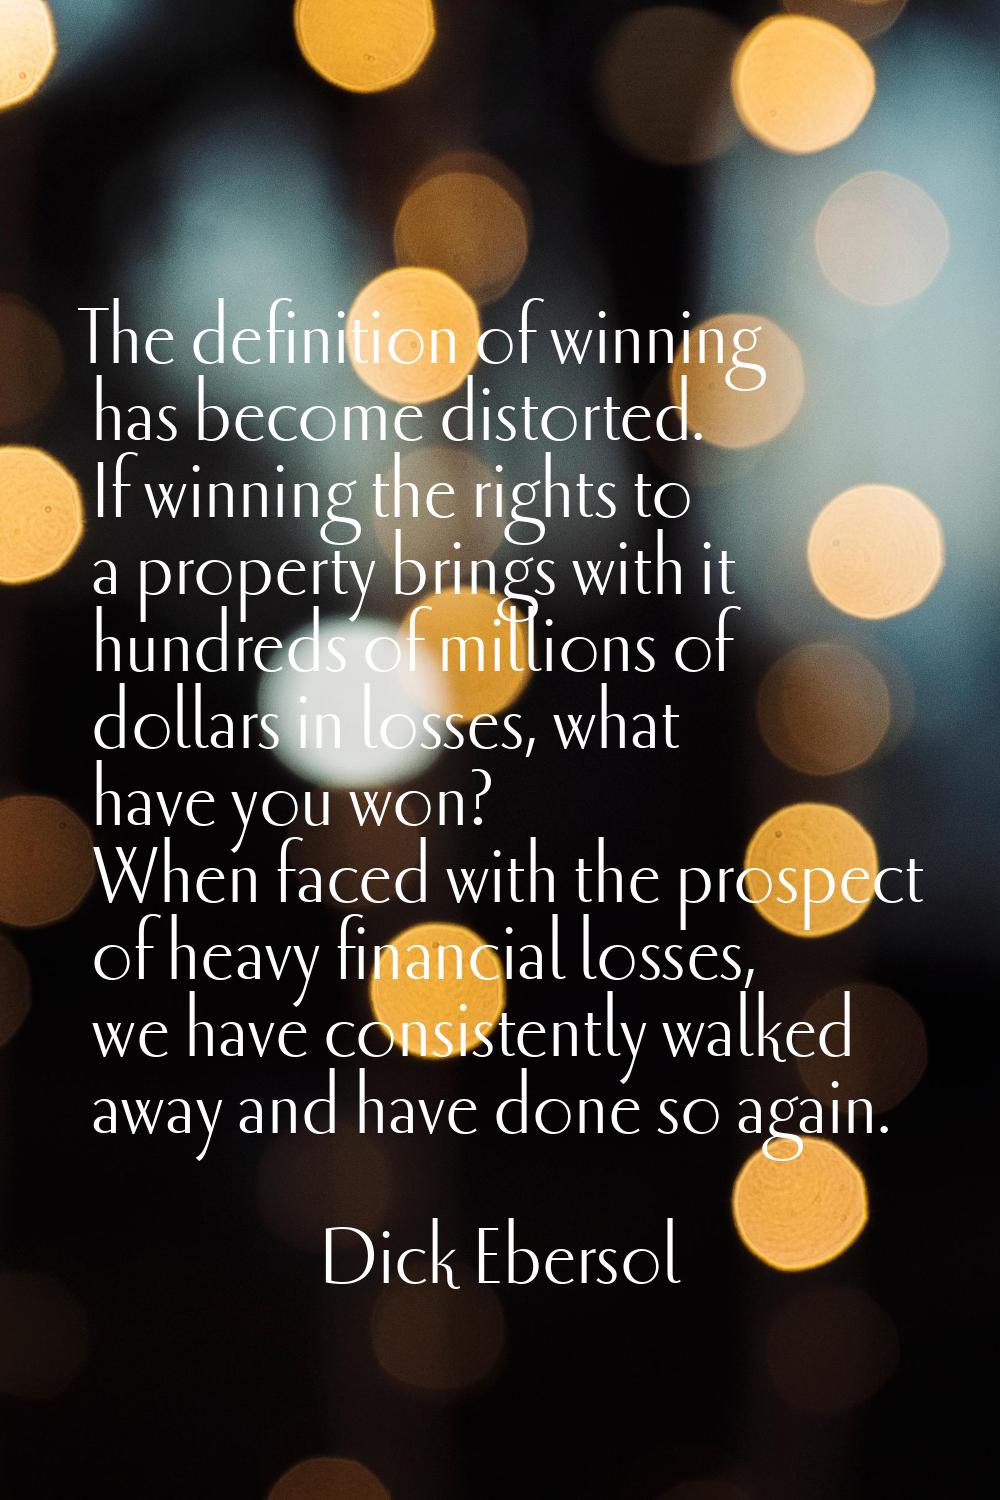 The definition of winning has become distorted. If winning the rights to a property brings with it 